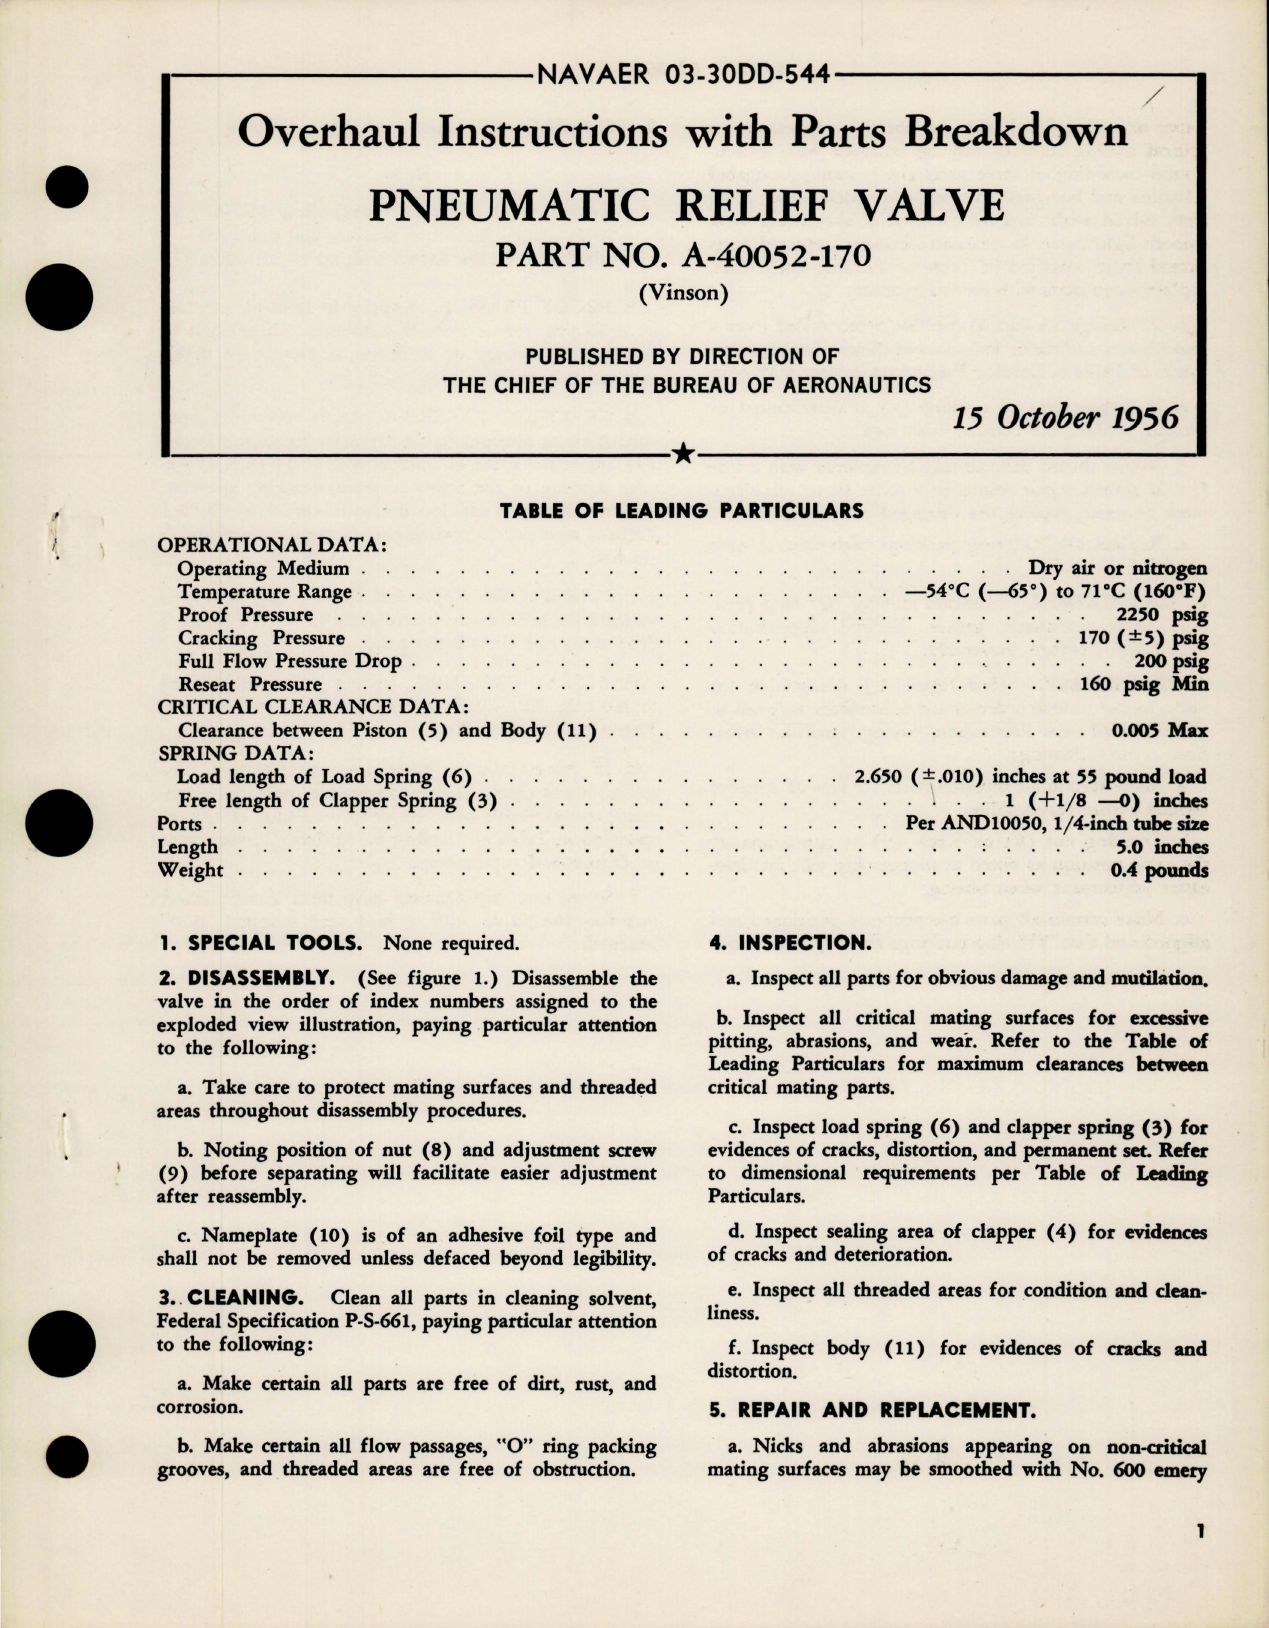 Sample page 1 from AirCorps Library document: Overhaul Instructions with Parts Breakdown for Pneumatic Relief Valve - Part A-40052-170 